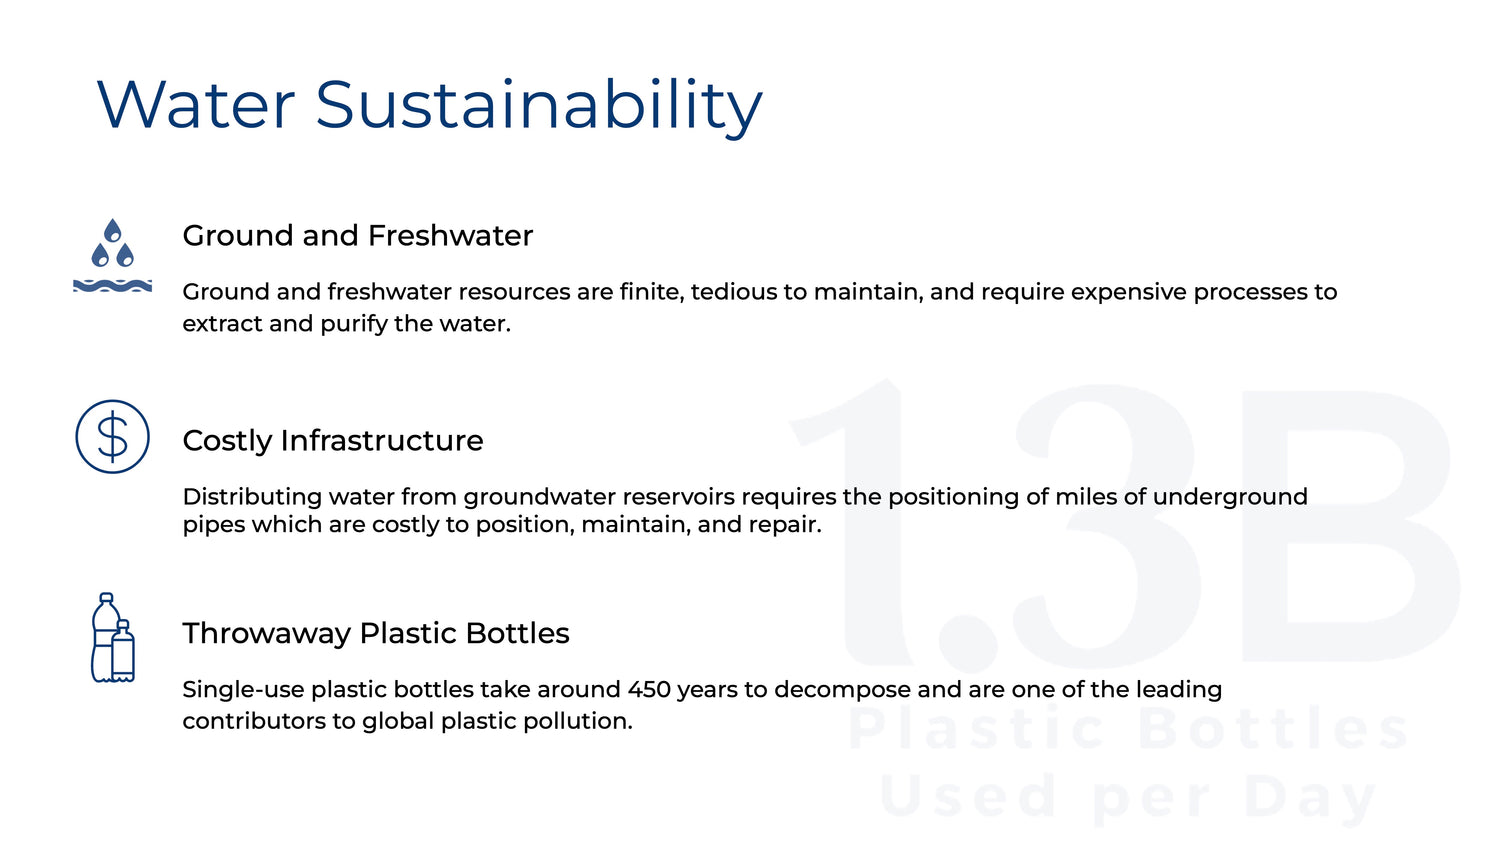 Water Sustainability: ground and freshwater depletion, costly infrastructure, single-use plastic bottles.